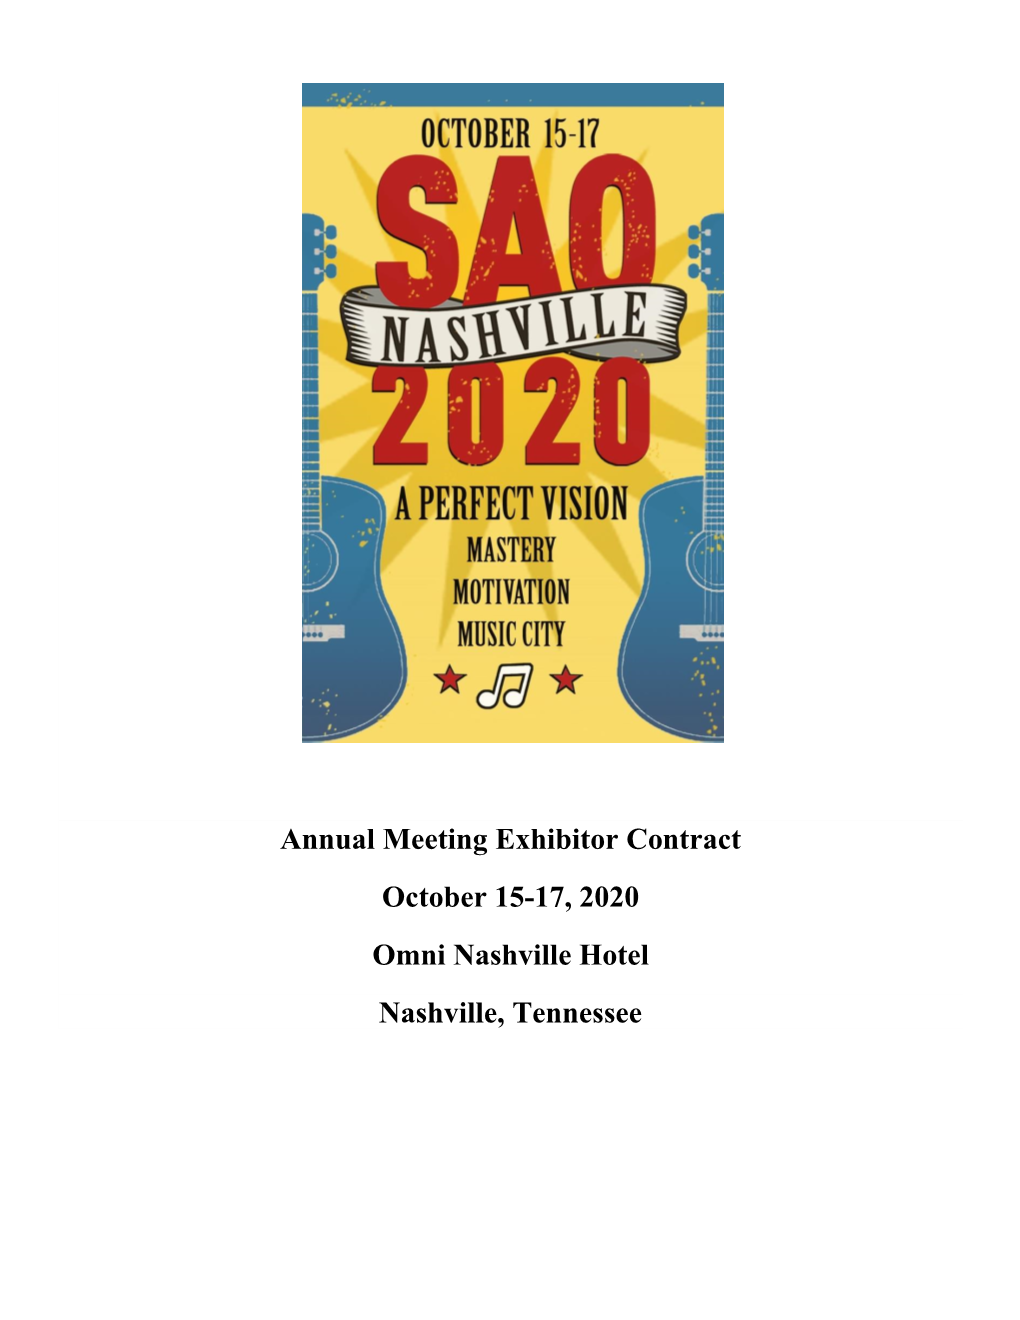 Annual Meeting Exhibitor Contract October 15-17, 2020 Omni